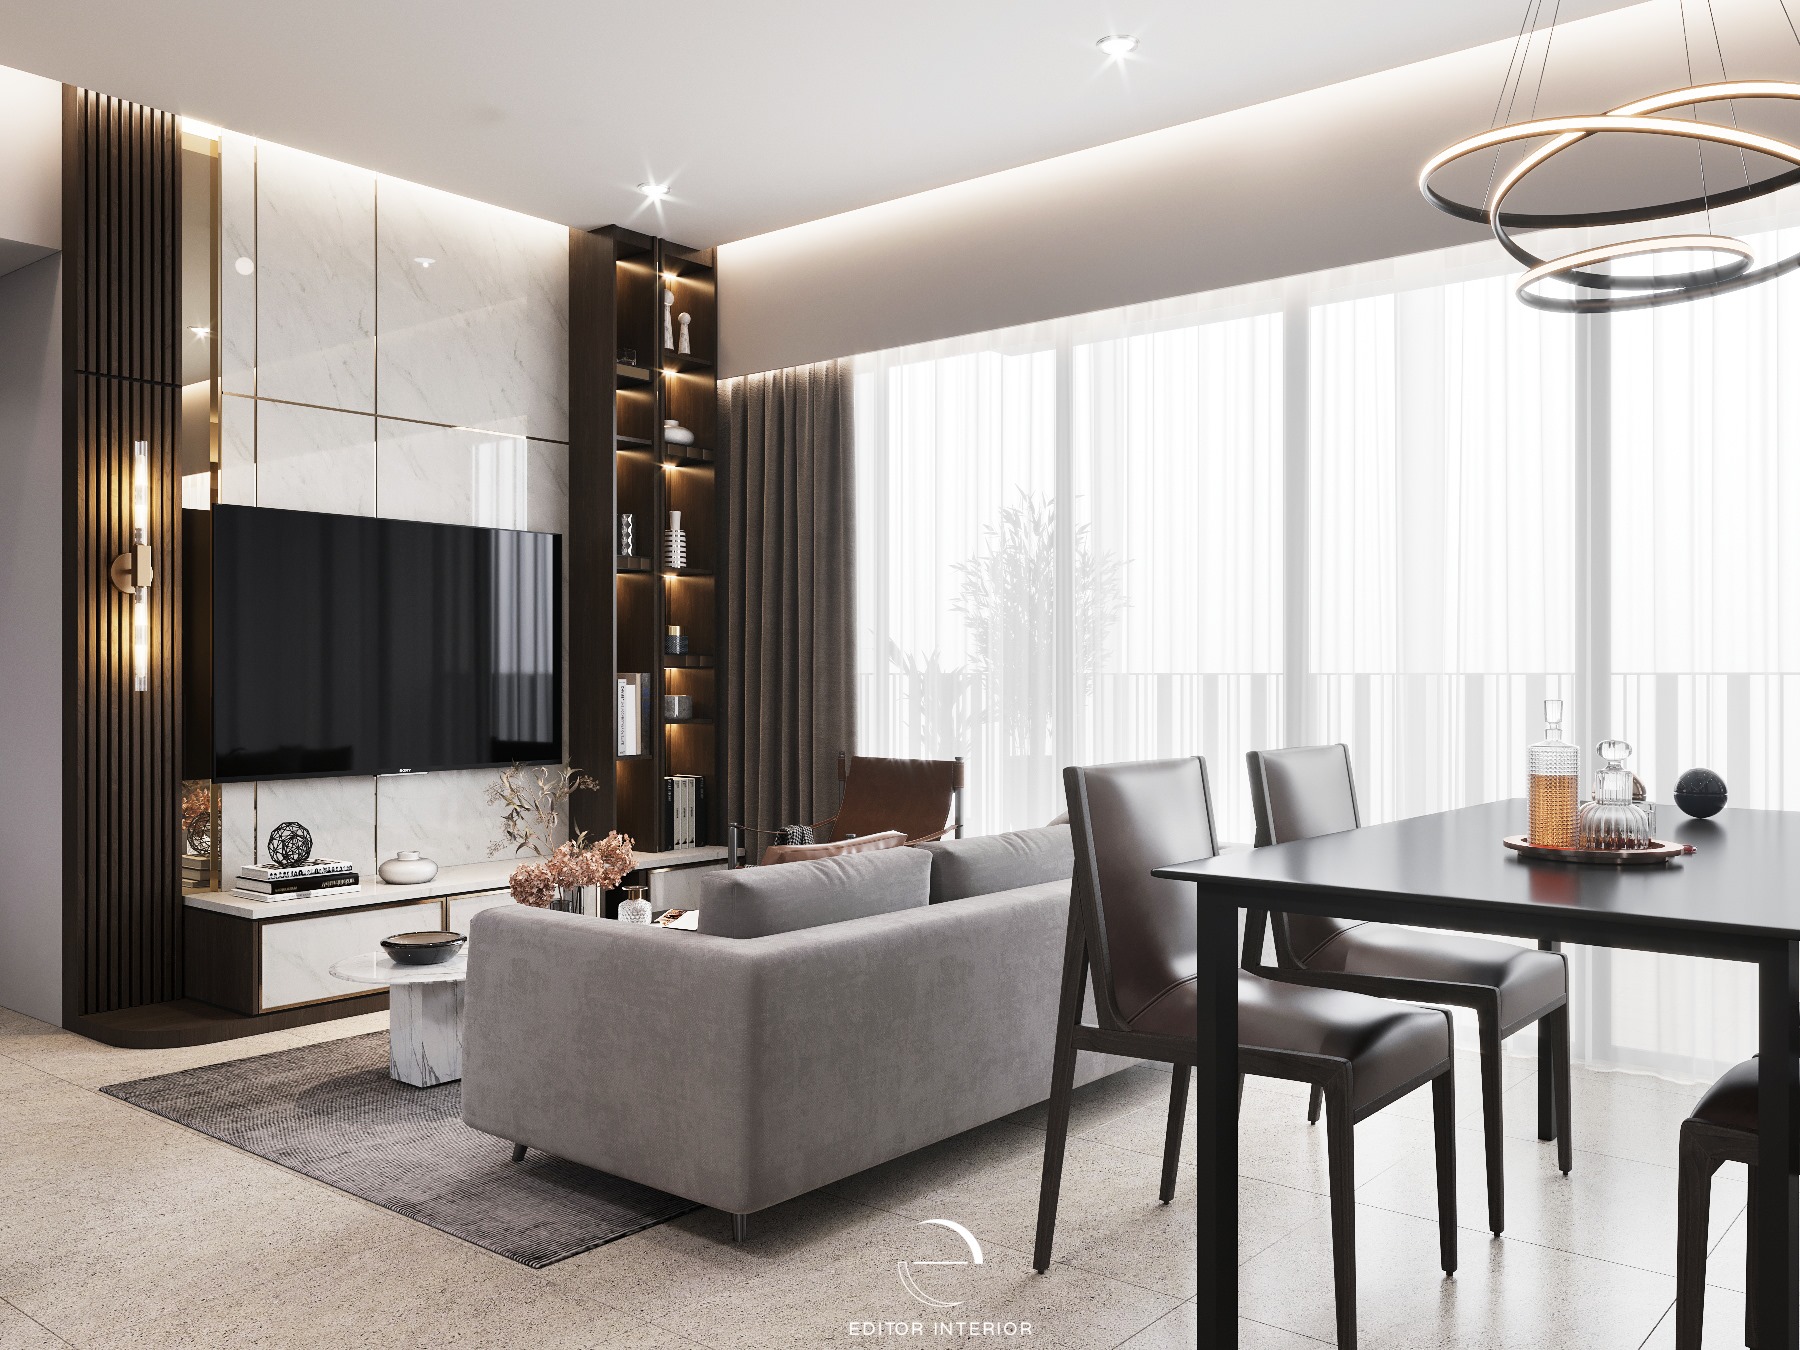 Granduer Park Residences - 883sqft by Editor Interior. Unit is Condo and follows a Modern Luxury style.